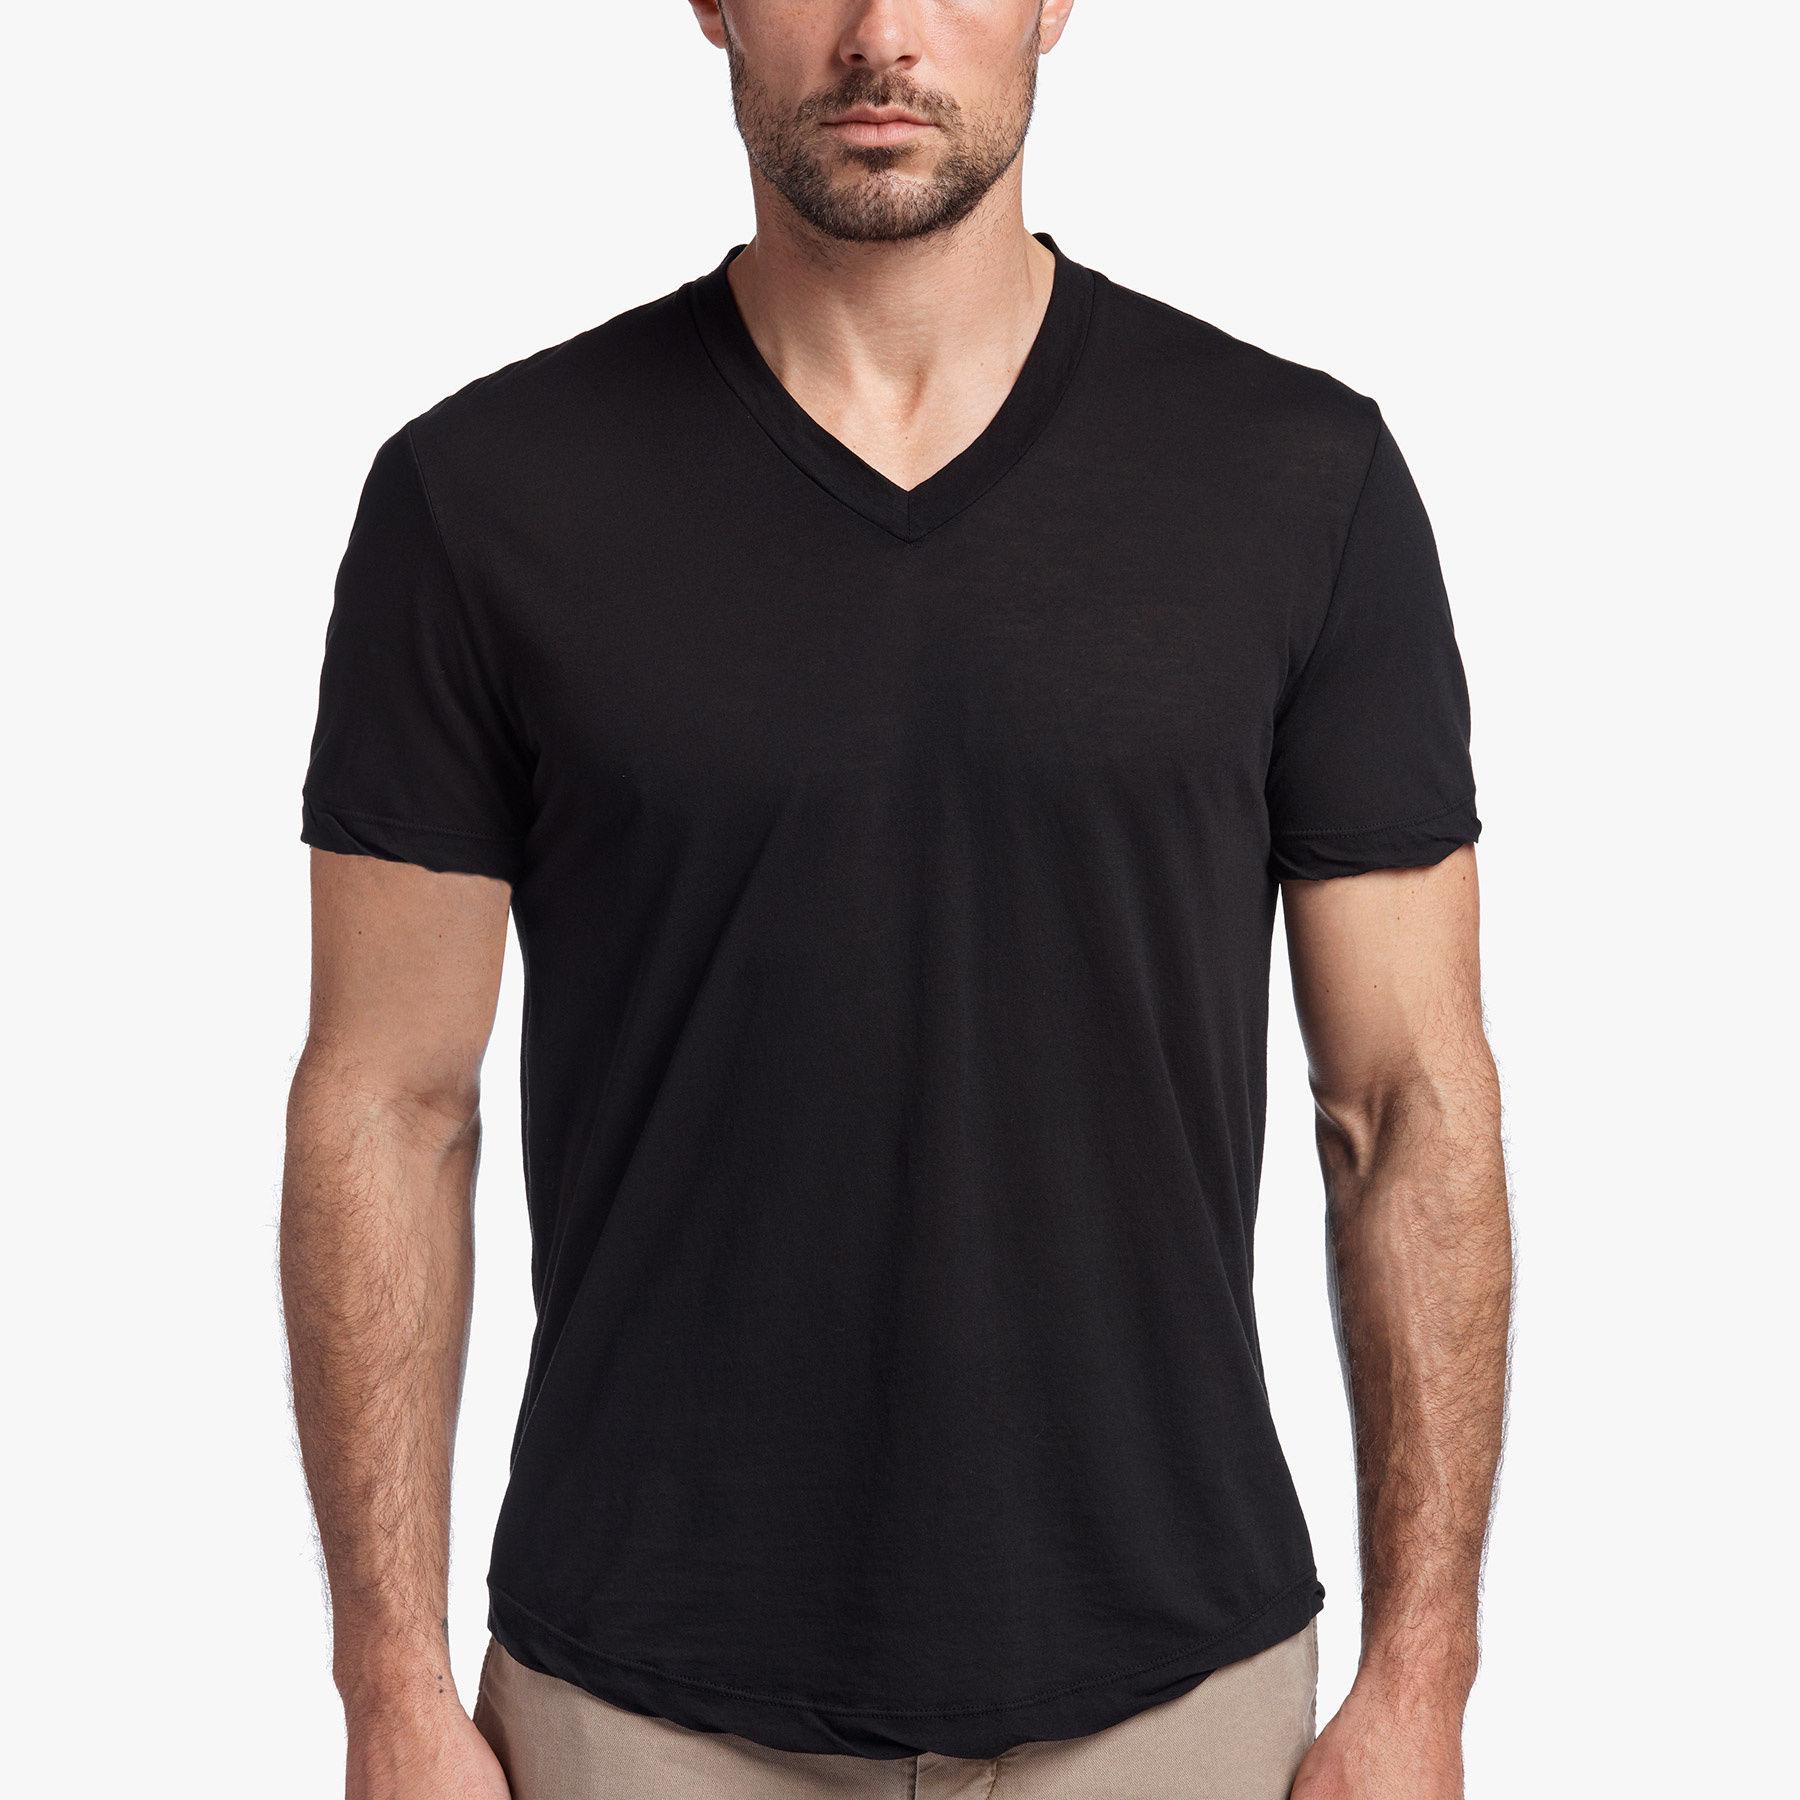 James Perse Clear Jersey V-neck in Black for Men - Lyst